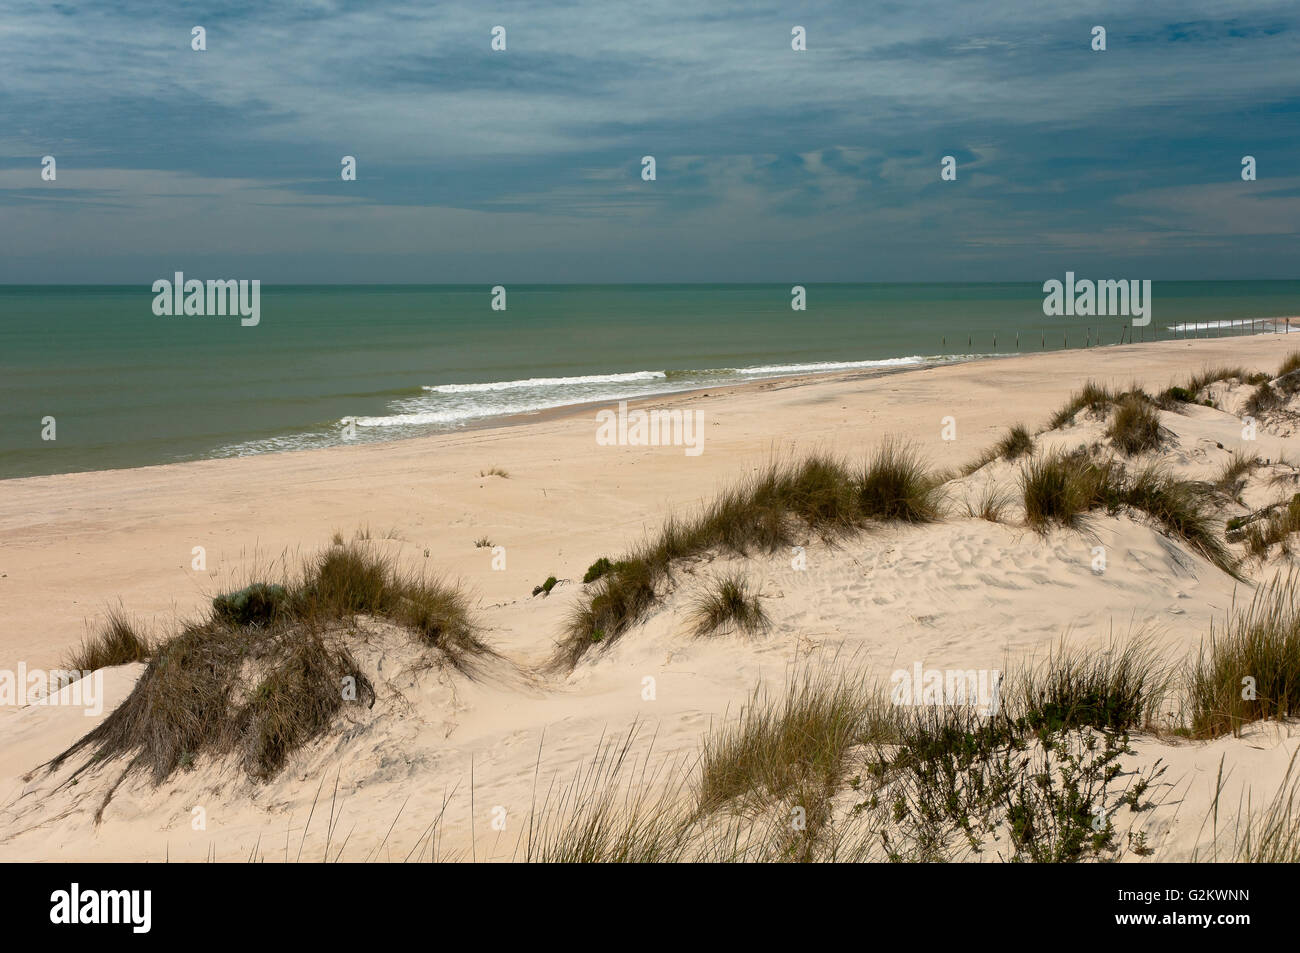 Dunes and natural beach, Doñana National Park, Almonte, Huelva province, Region of Andalusia, Spain, Europe Stock Photo